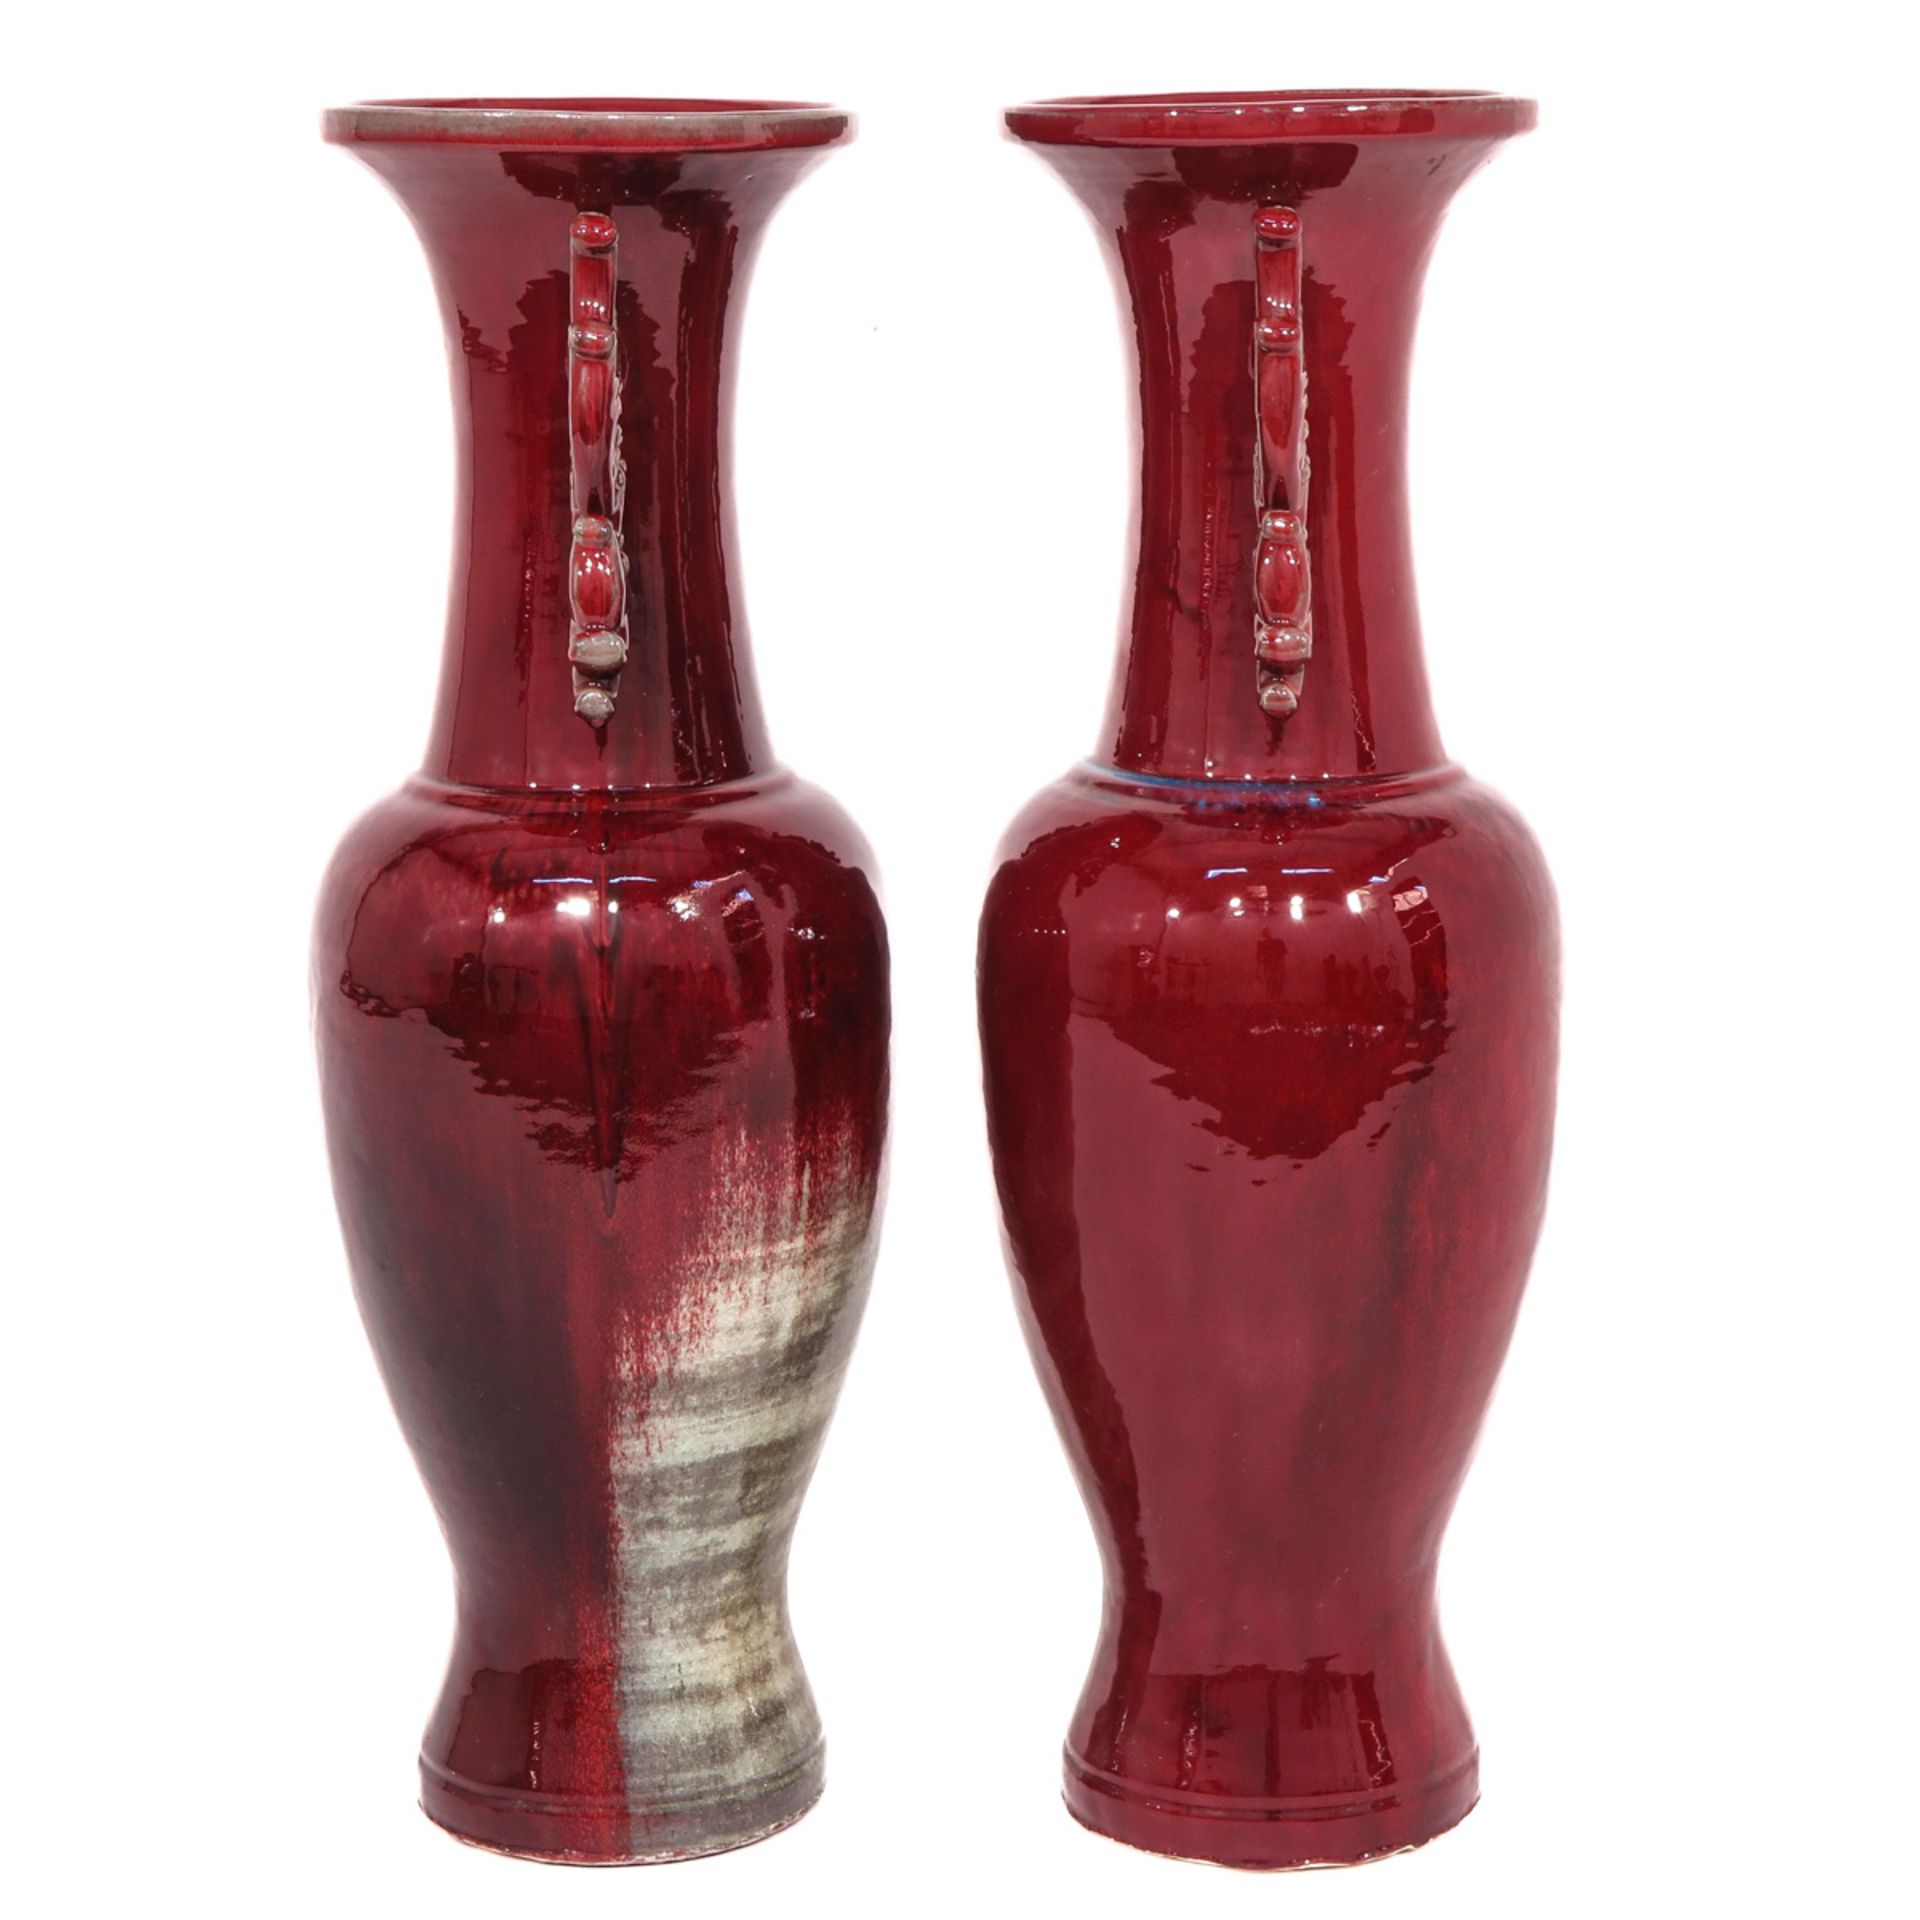 A Large Pair of Jun Ware Vases - Image 2 of 6